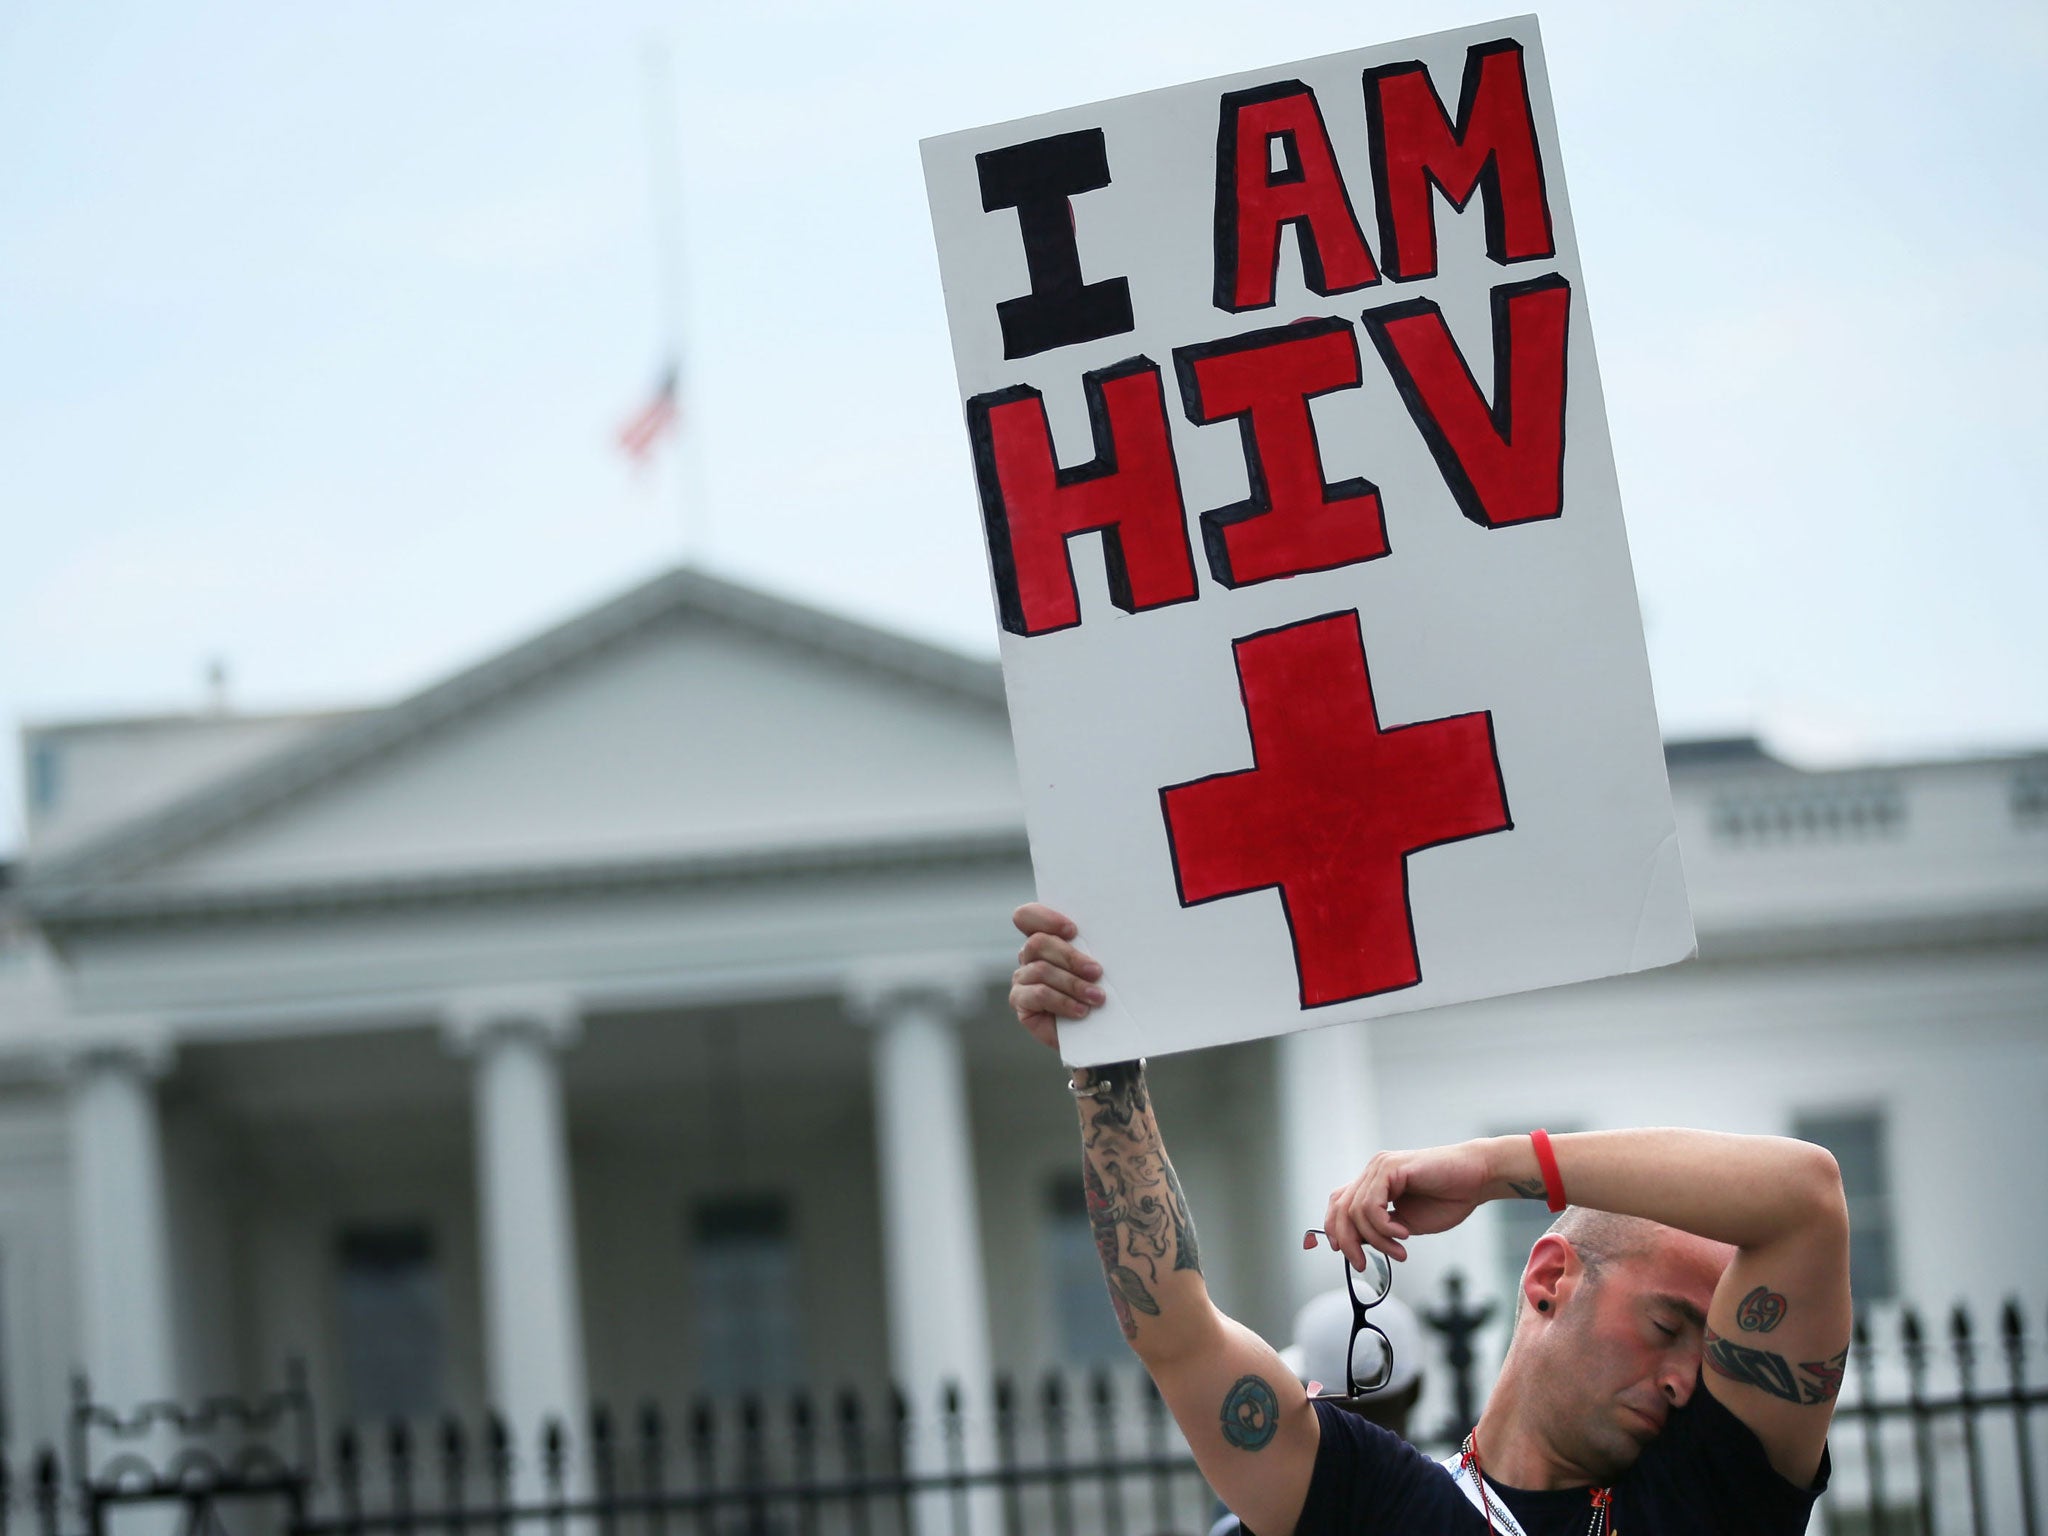 One in seven men on the London gay scene are HIV positive, while one in 20 twenty suffer from the infection nationally.